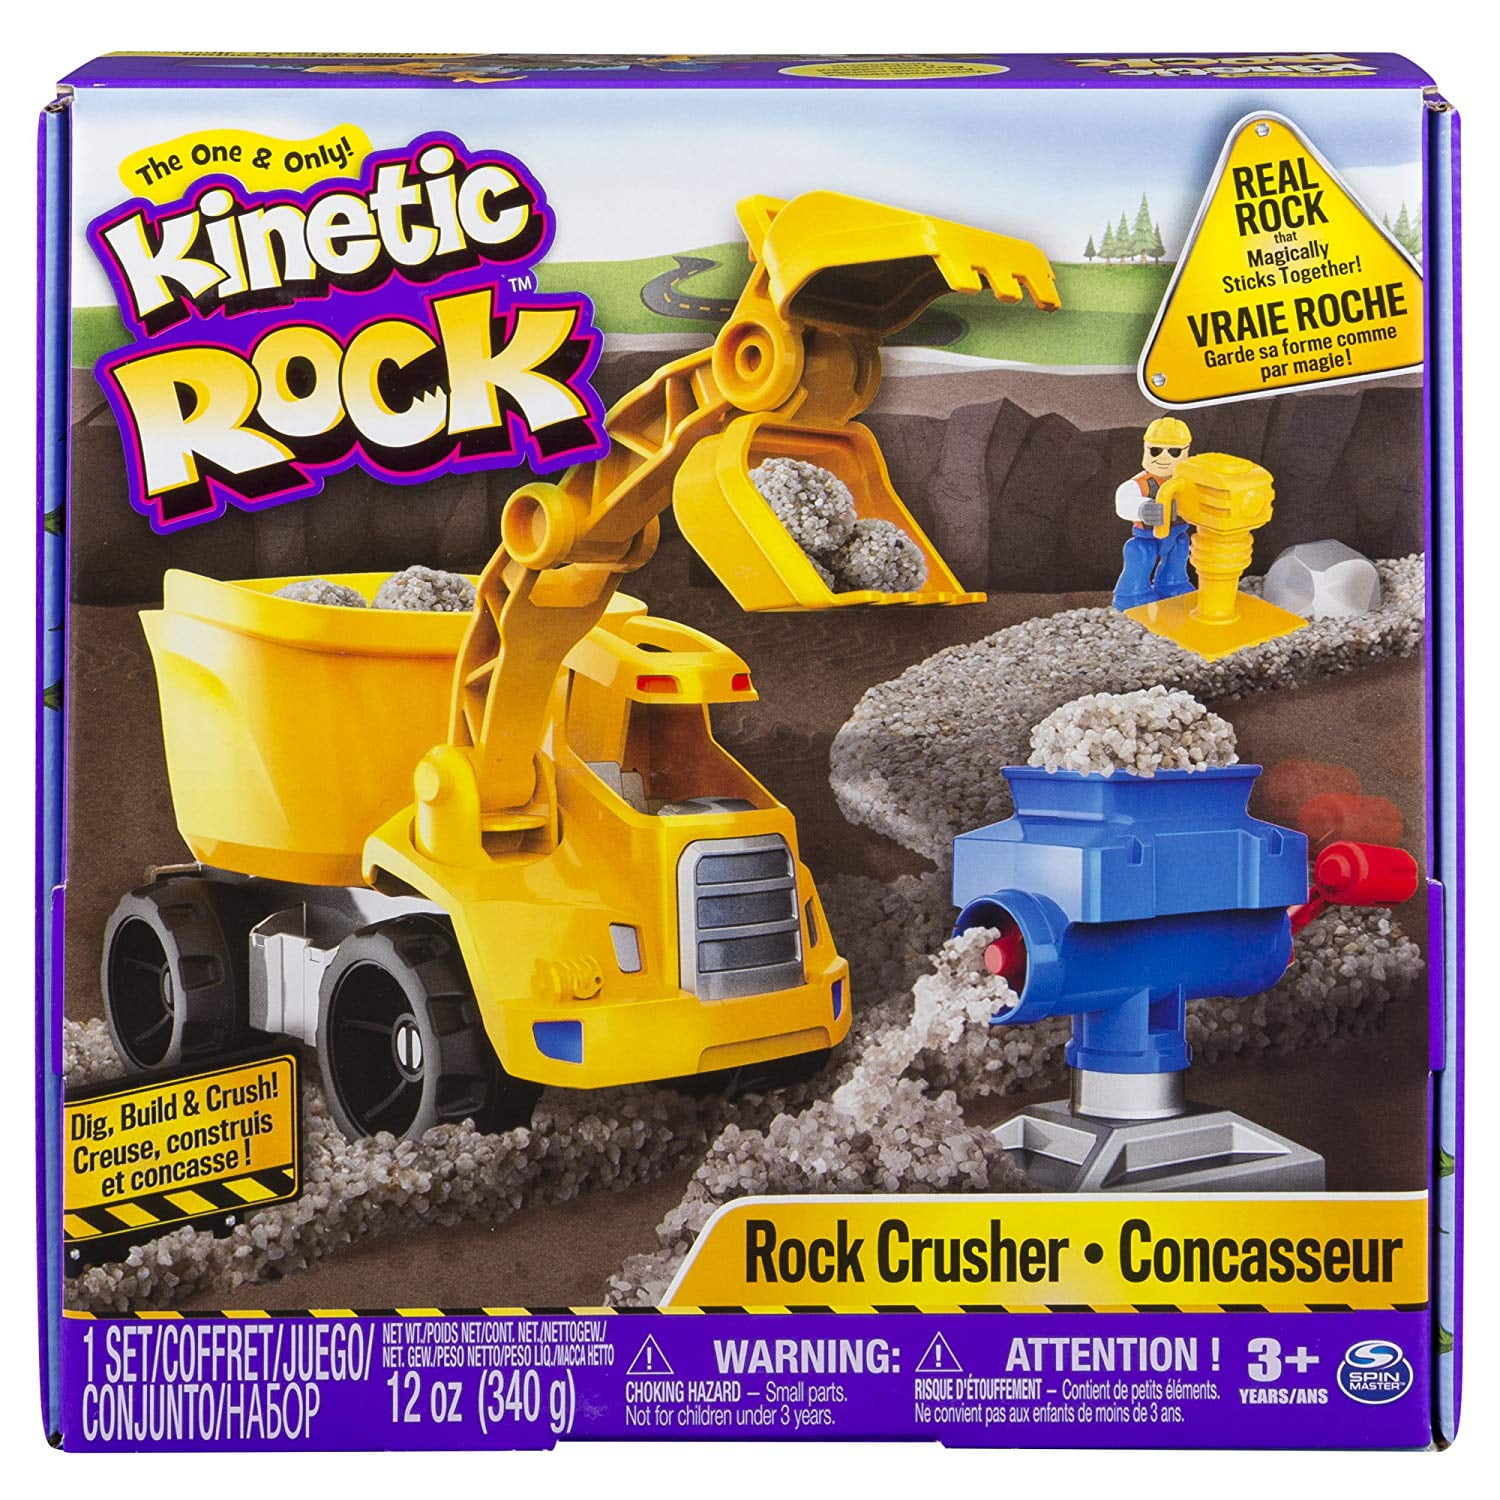 Kinetic Rock Rock Crusher Toy Kit with Construction Tools for Ages 3 and Up 